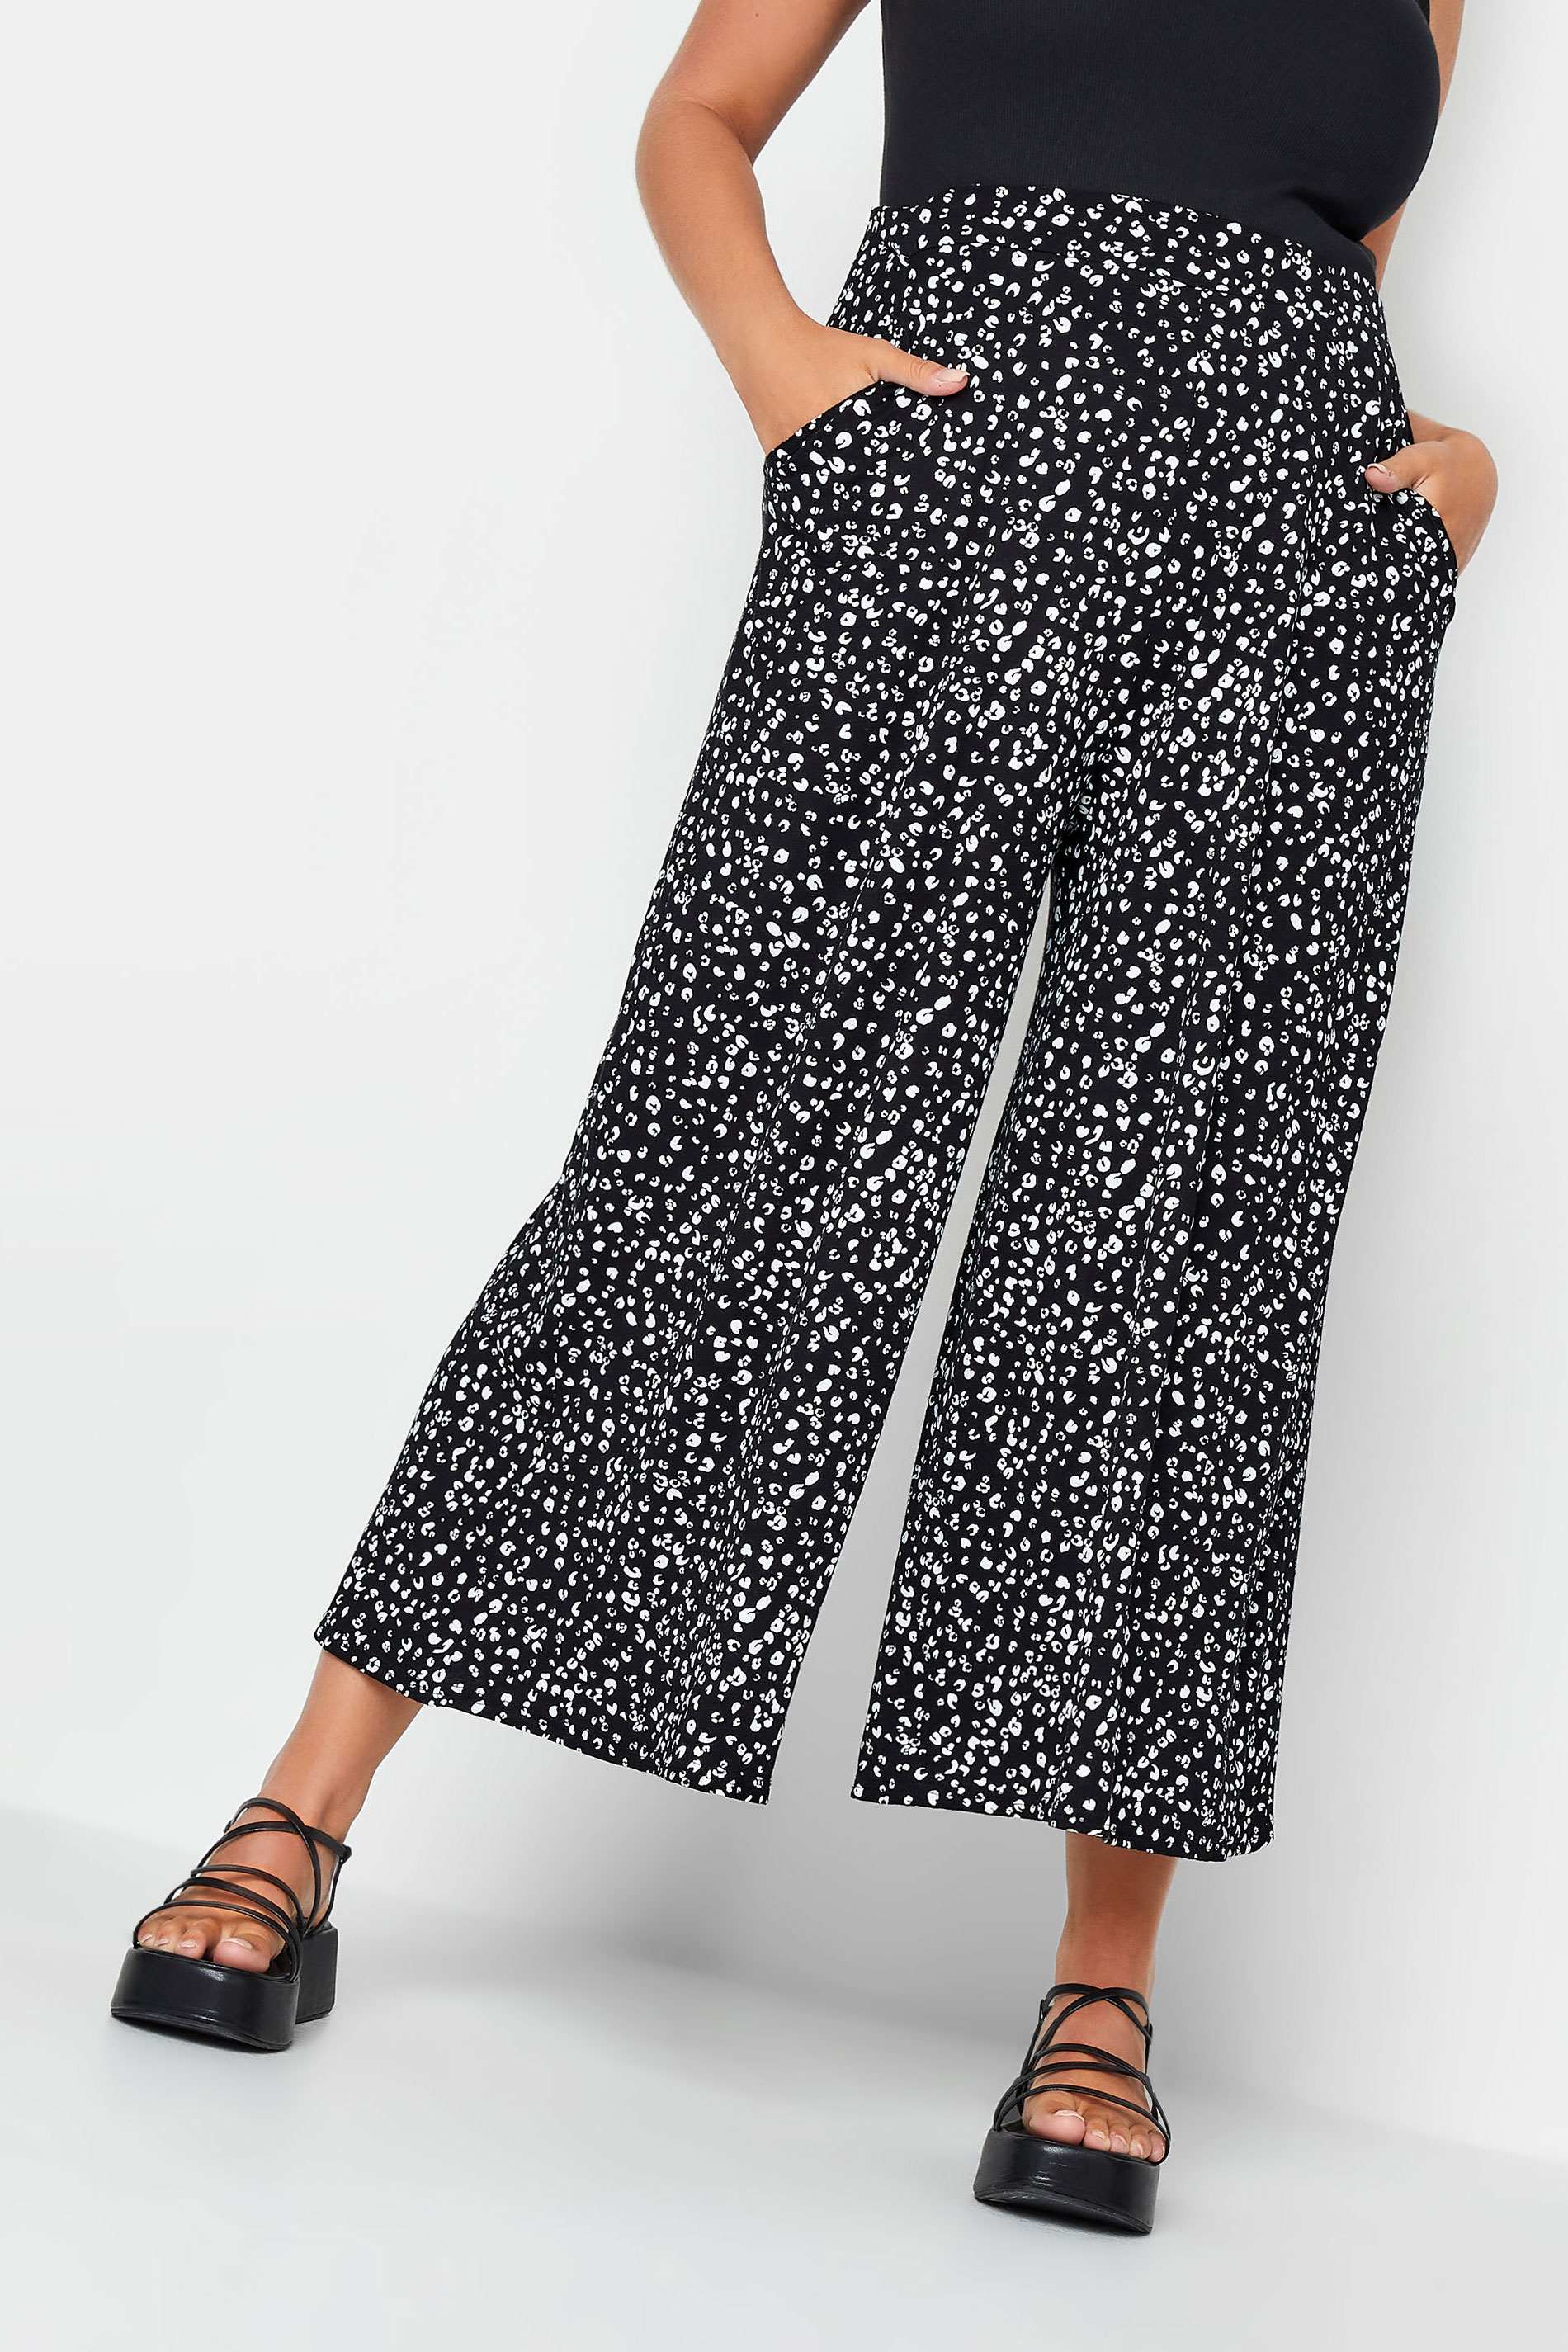 YOURS Curve Plus Size Black Leopard Print Midaxi Culottes | Yours Clothing 1